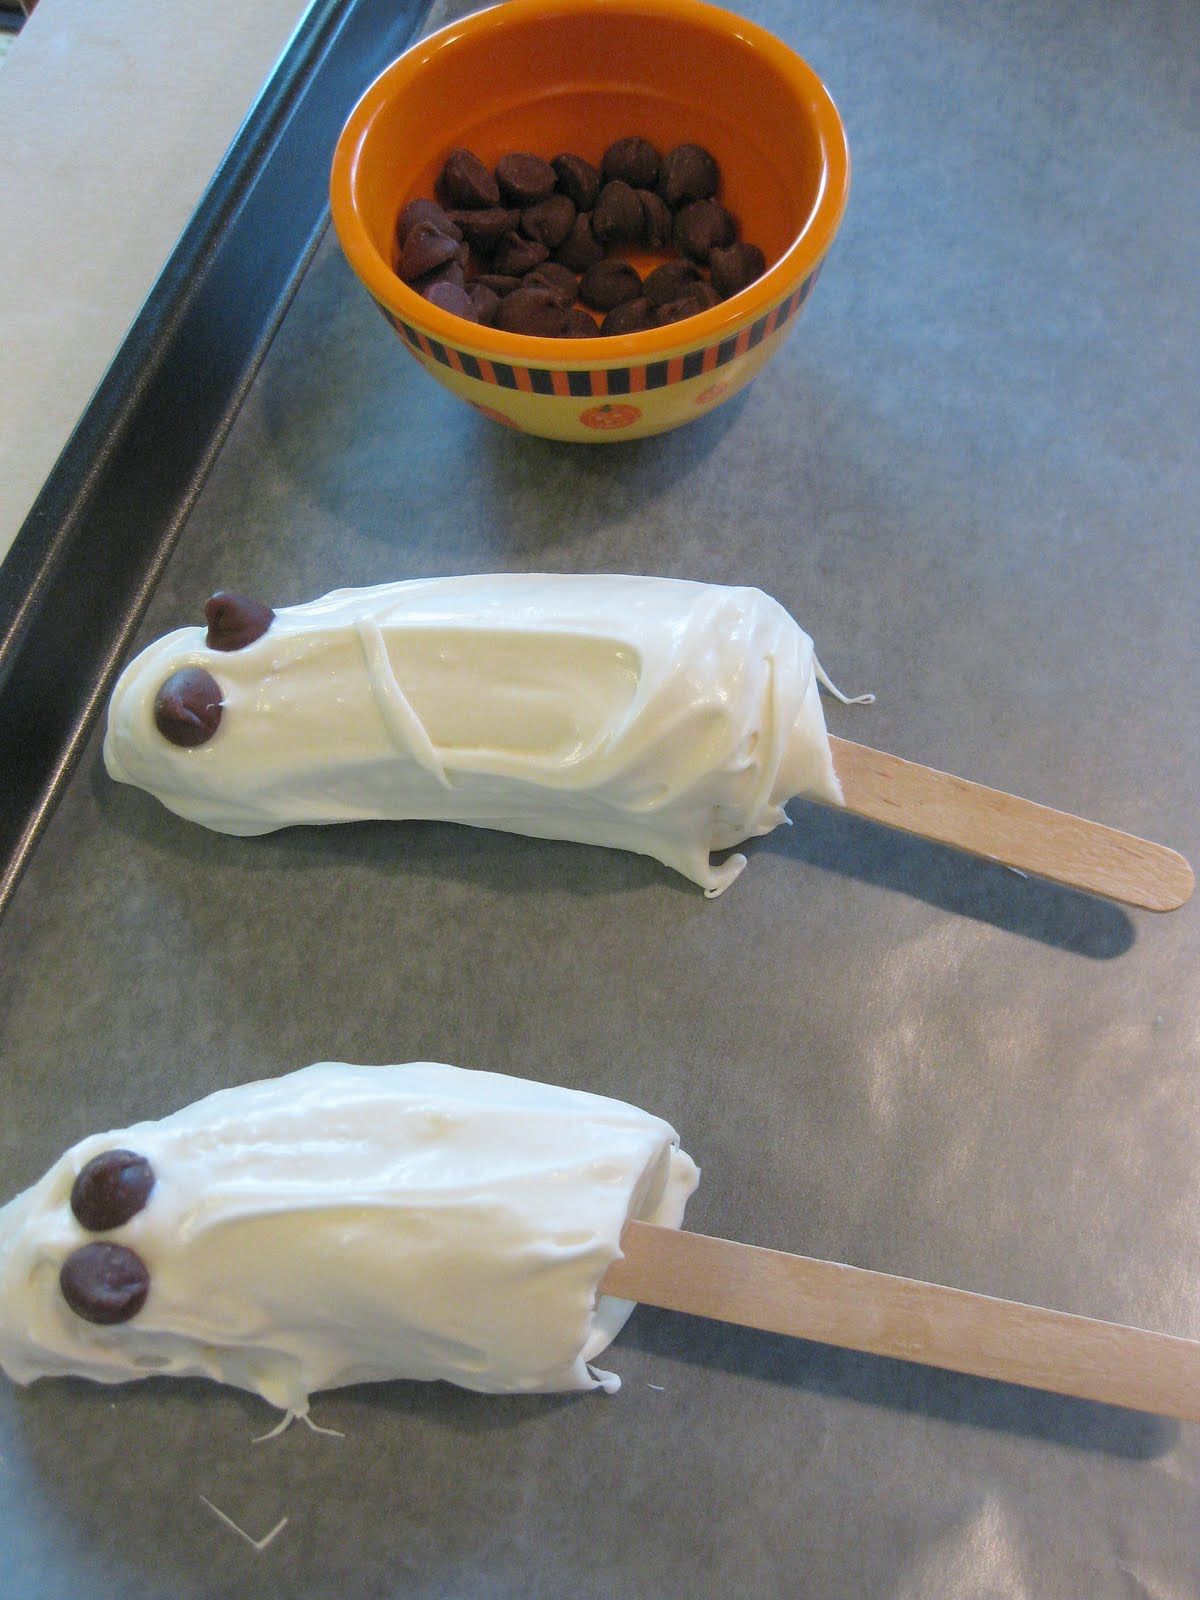 Ghost Banana: bananas dipped in white chocolate and frozen. Add chocolate chips